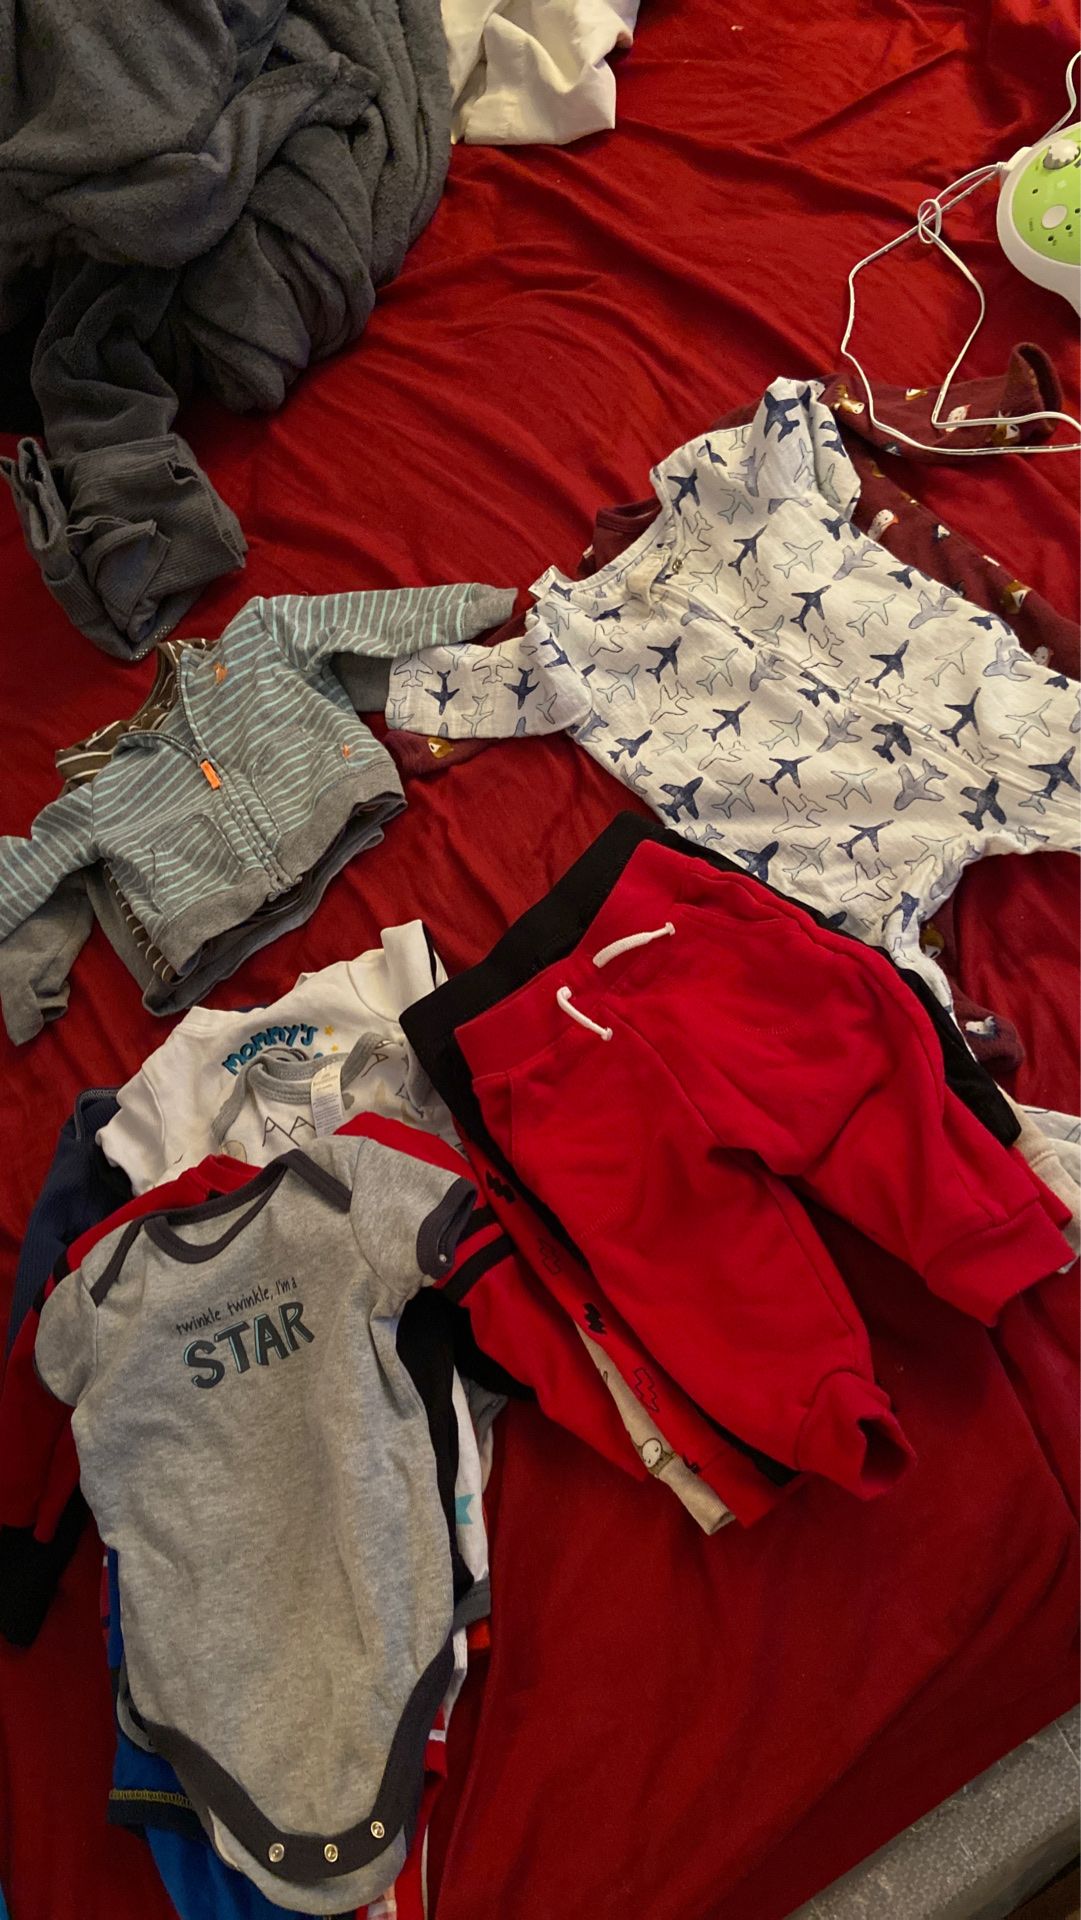 6-9 months baby boy clothes